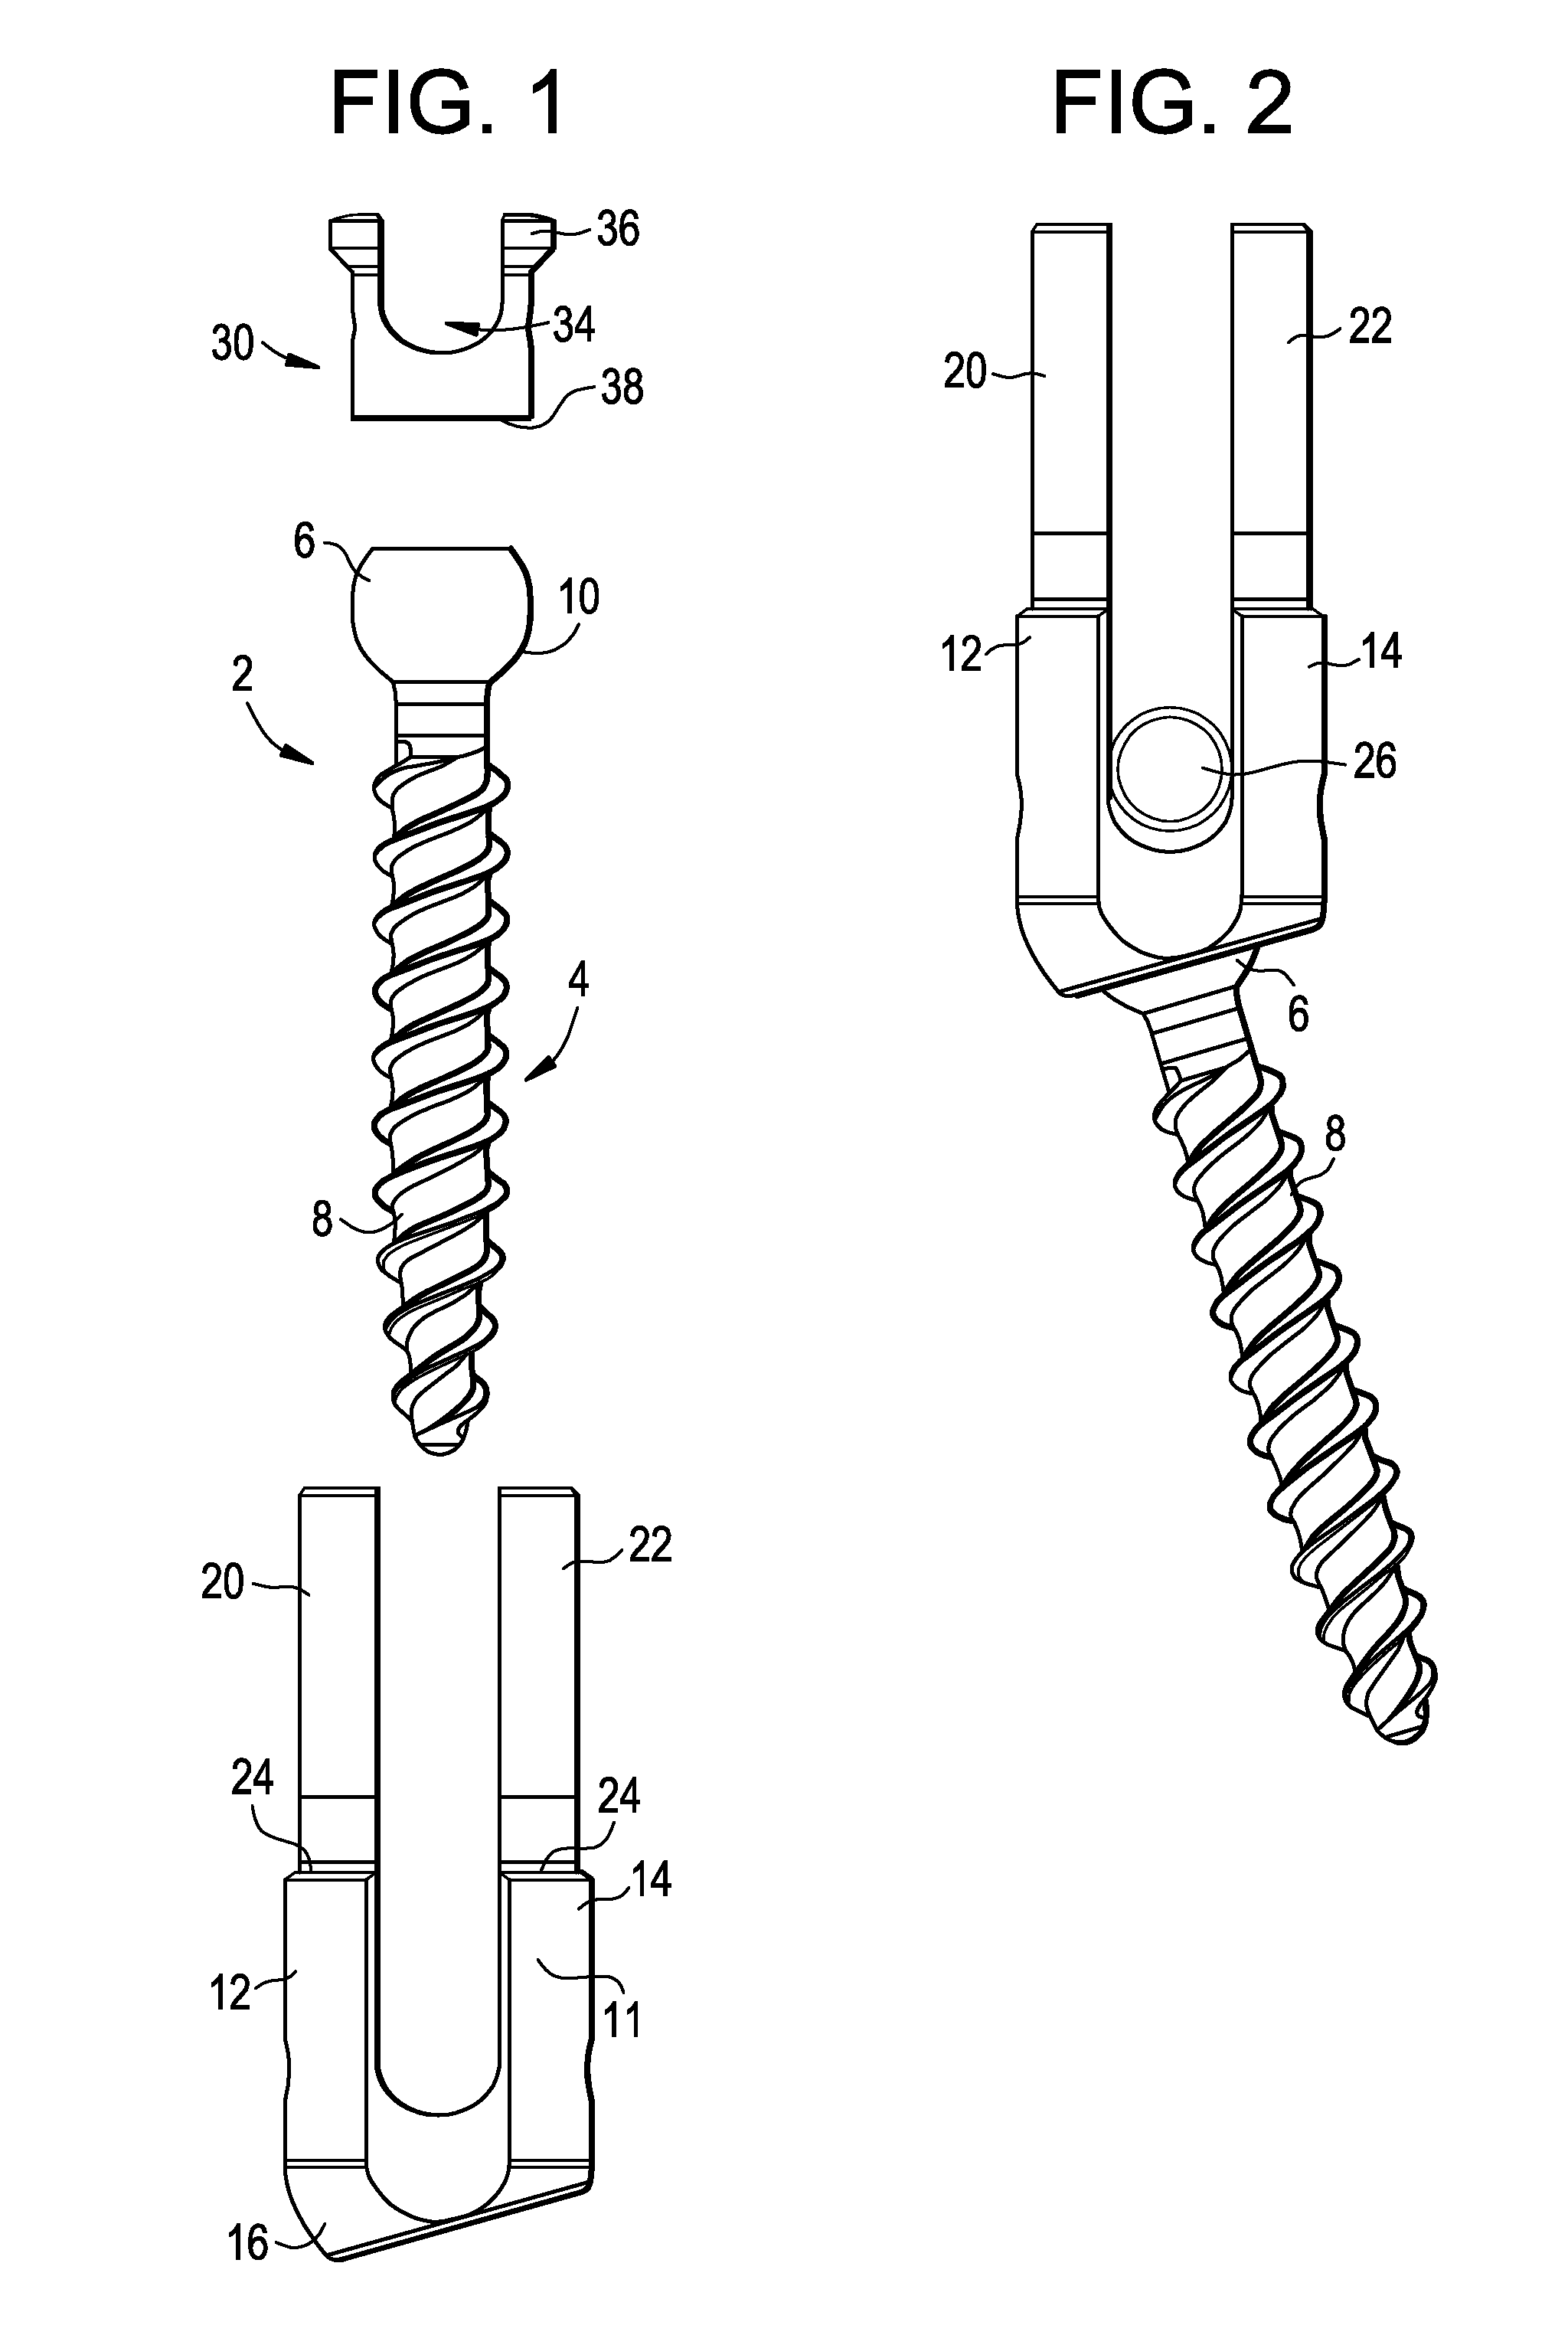 Methods for correction of spinal deformities